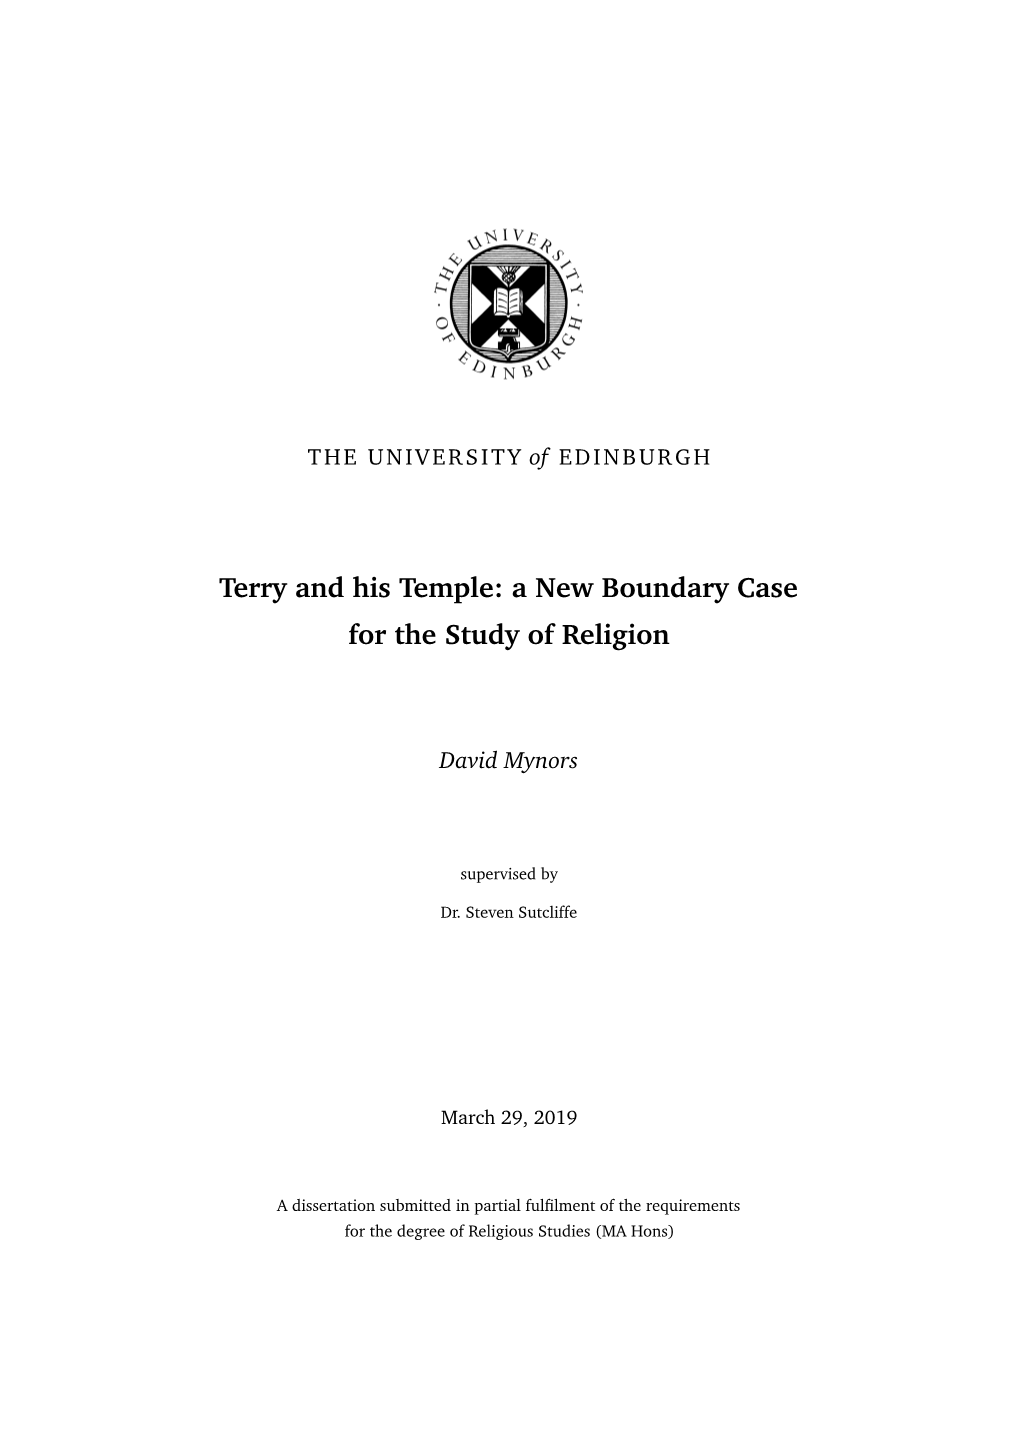 Terry and His Temple: a New Boundary Case for the Study of Religion